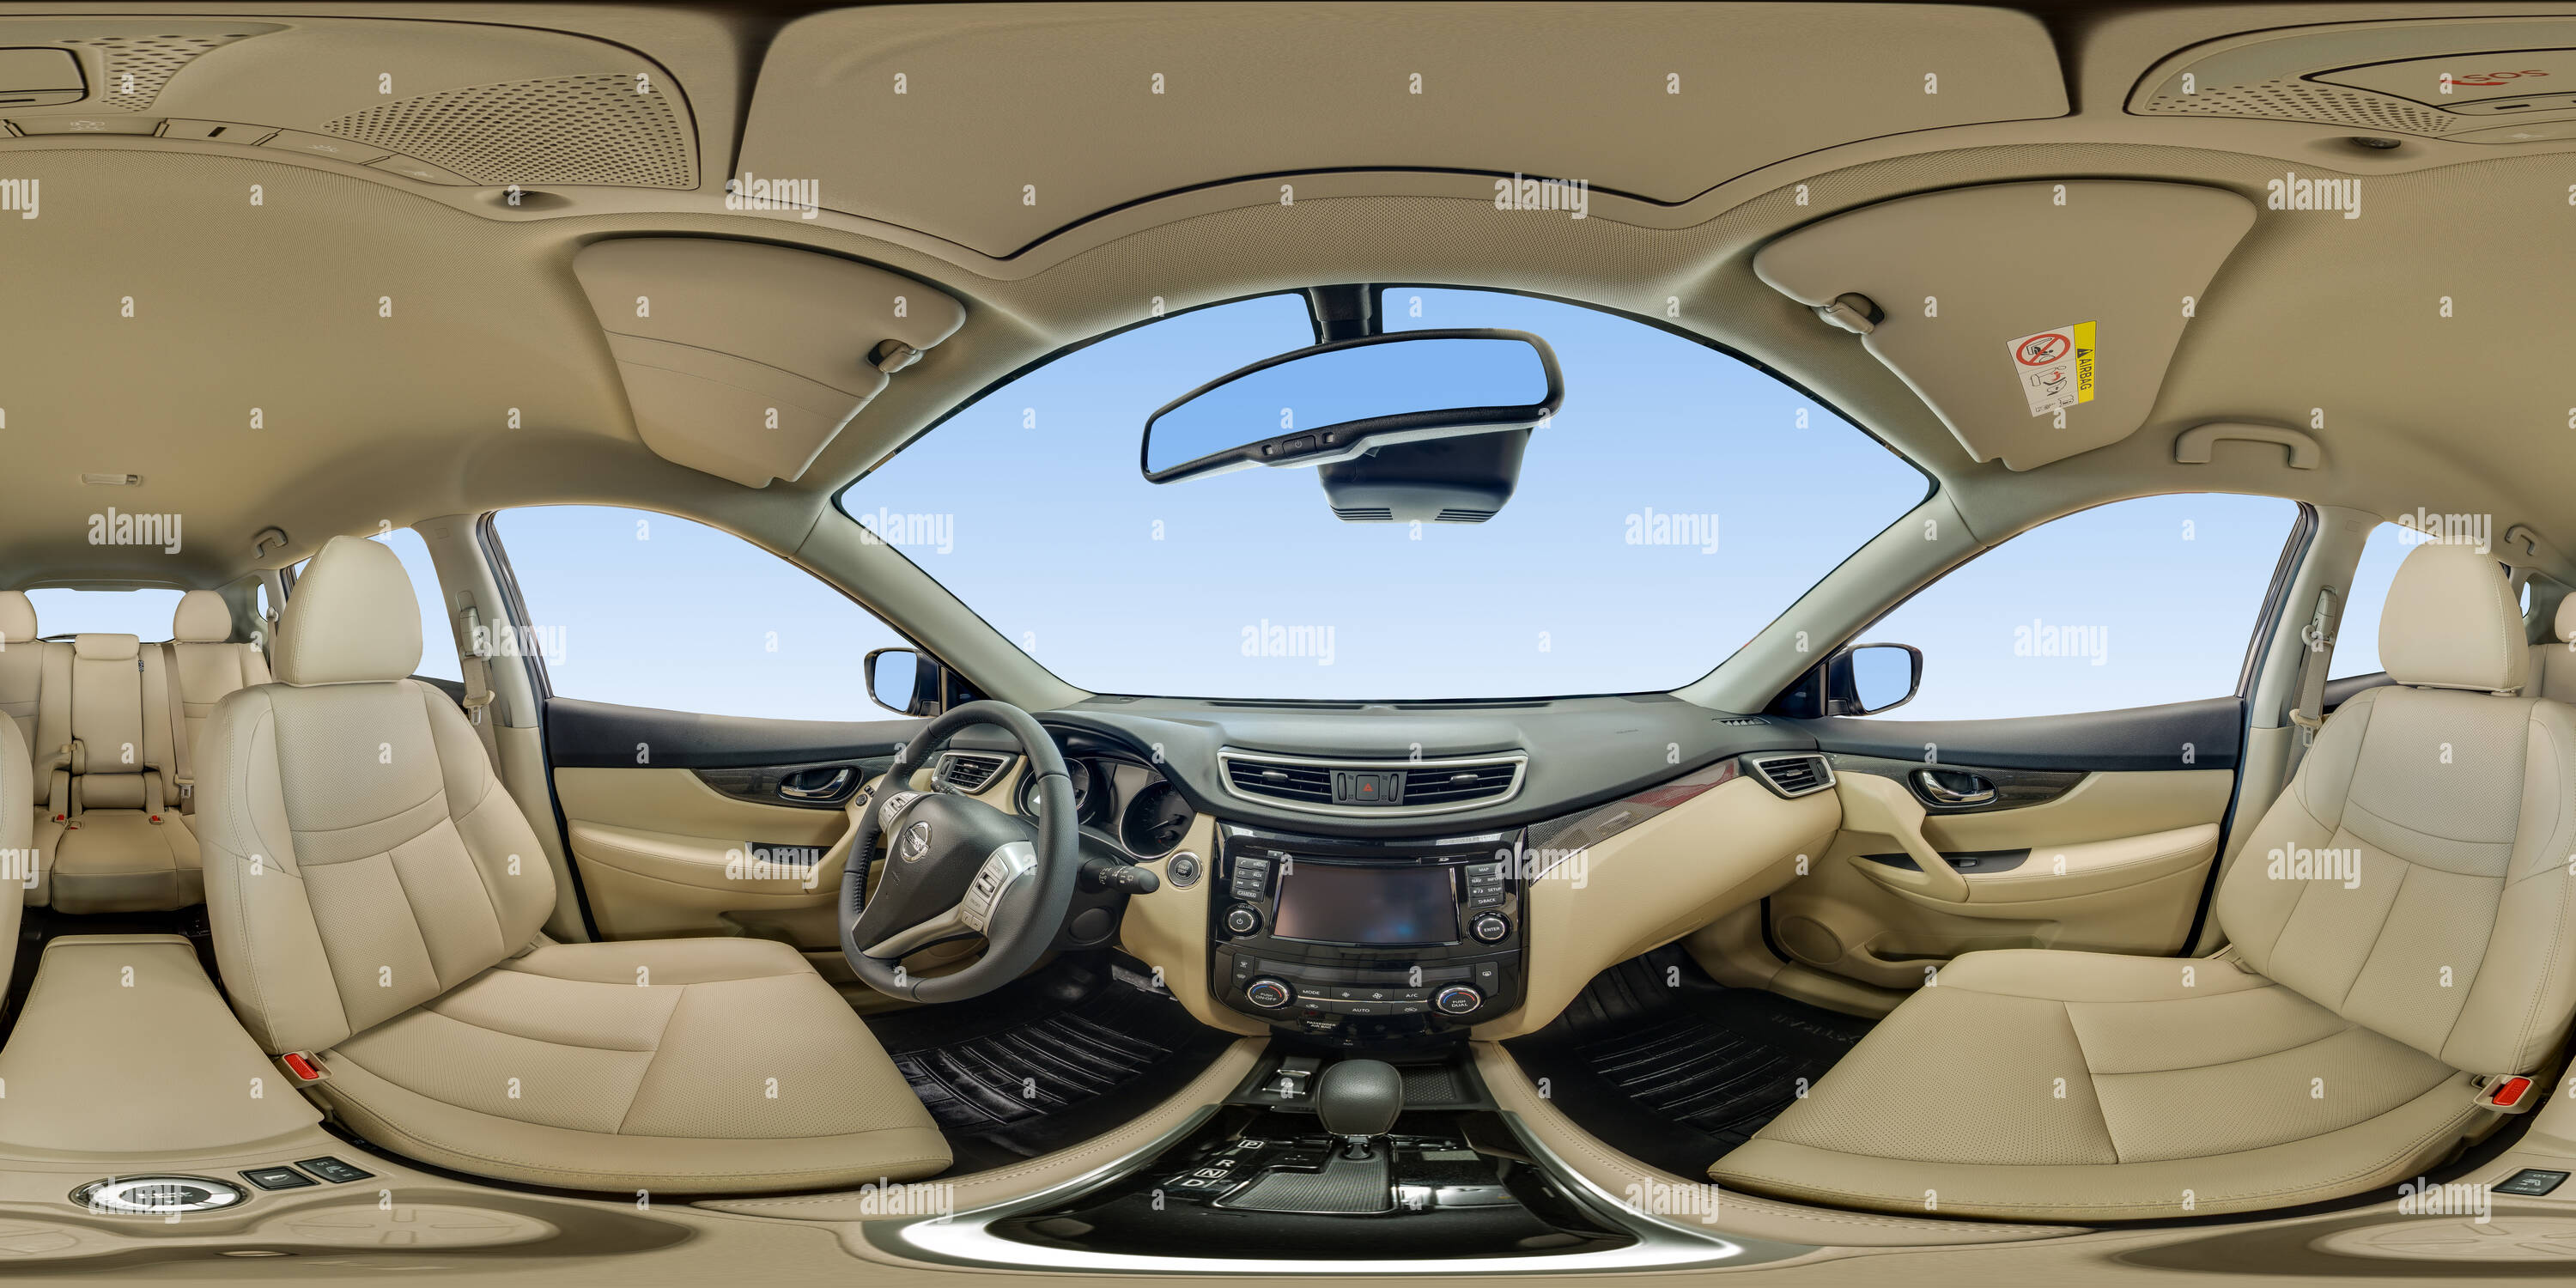 Scatter manipulate Vulgarity 360° view of Inside of Nissan X-Trail Light Interior - Alamy